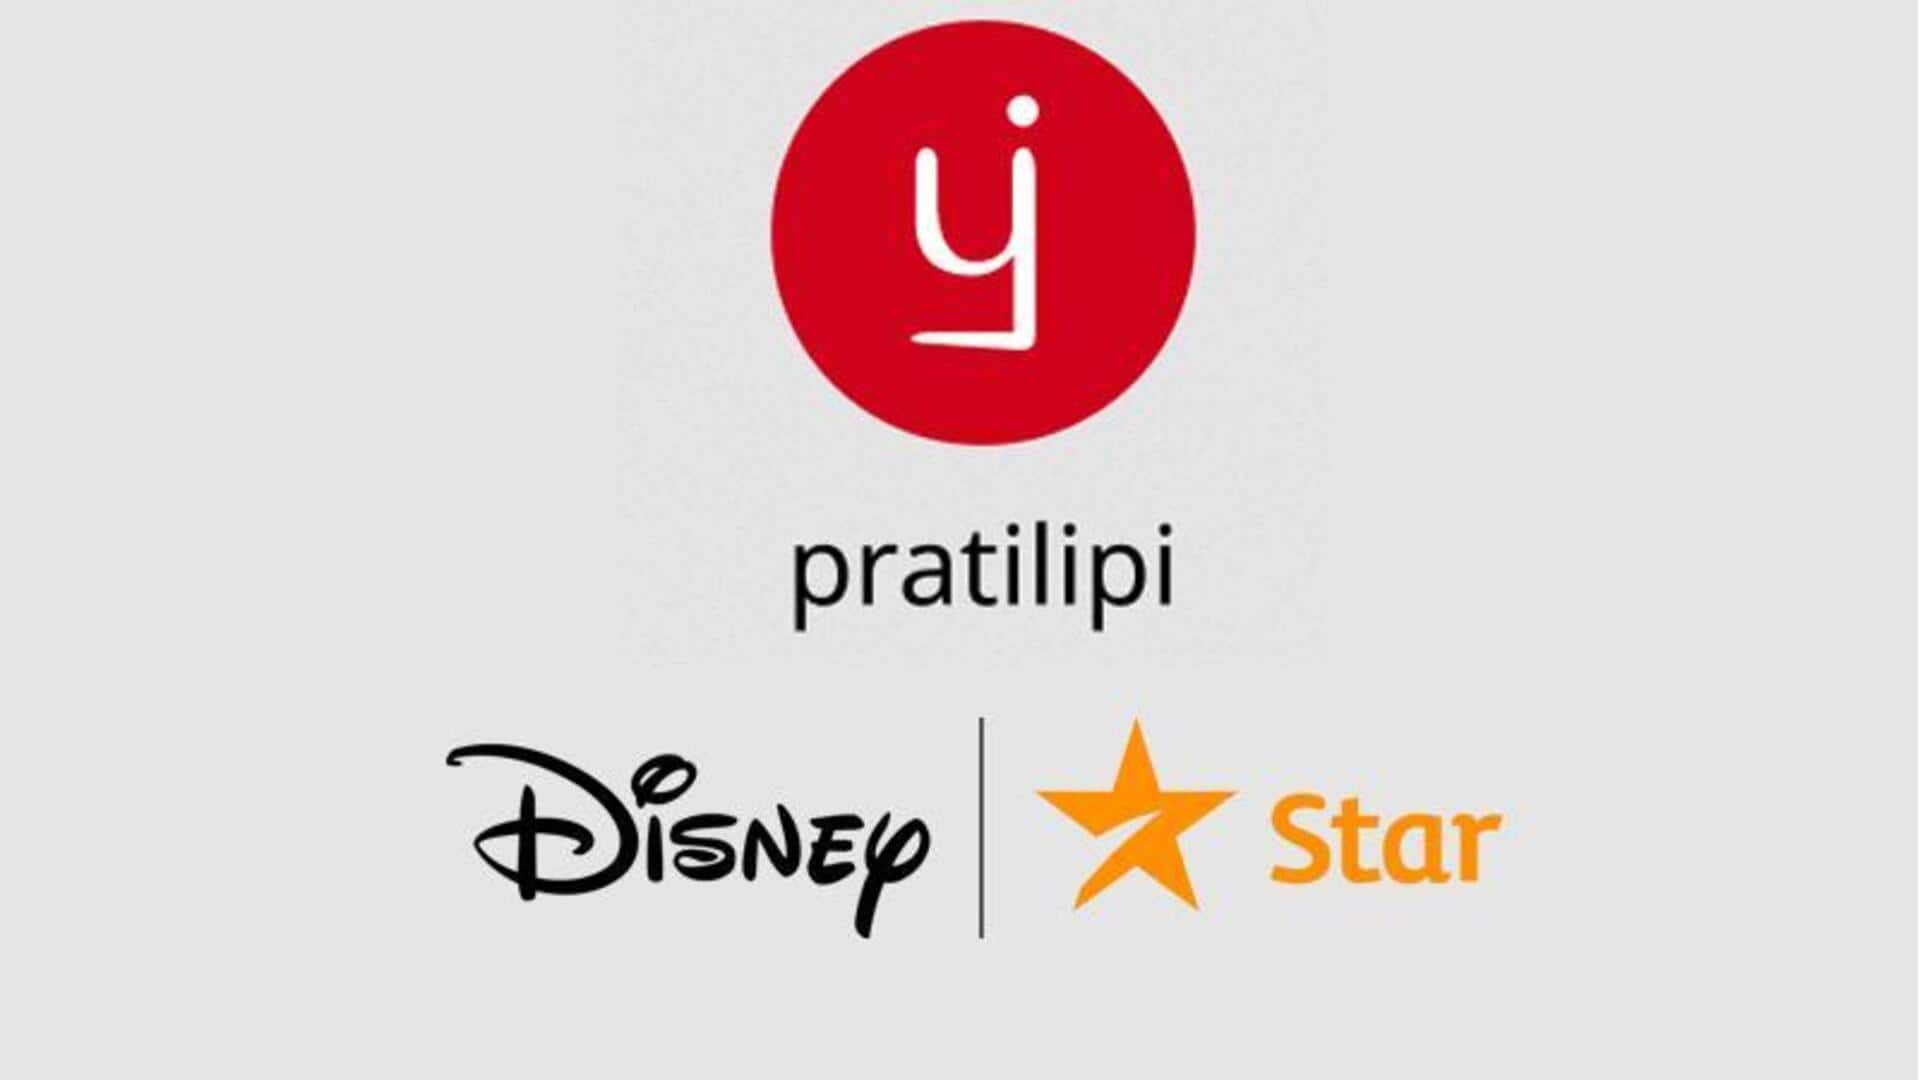 Pratilipi and Disney Star collaborate for multi-series content deal